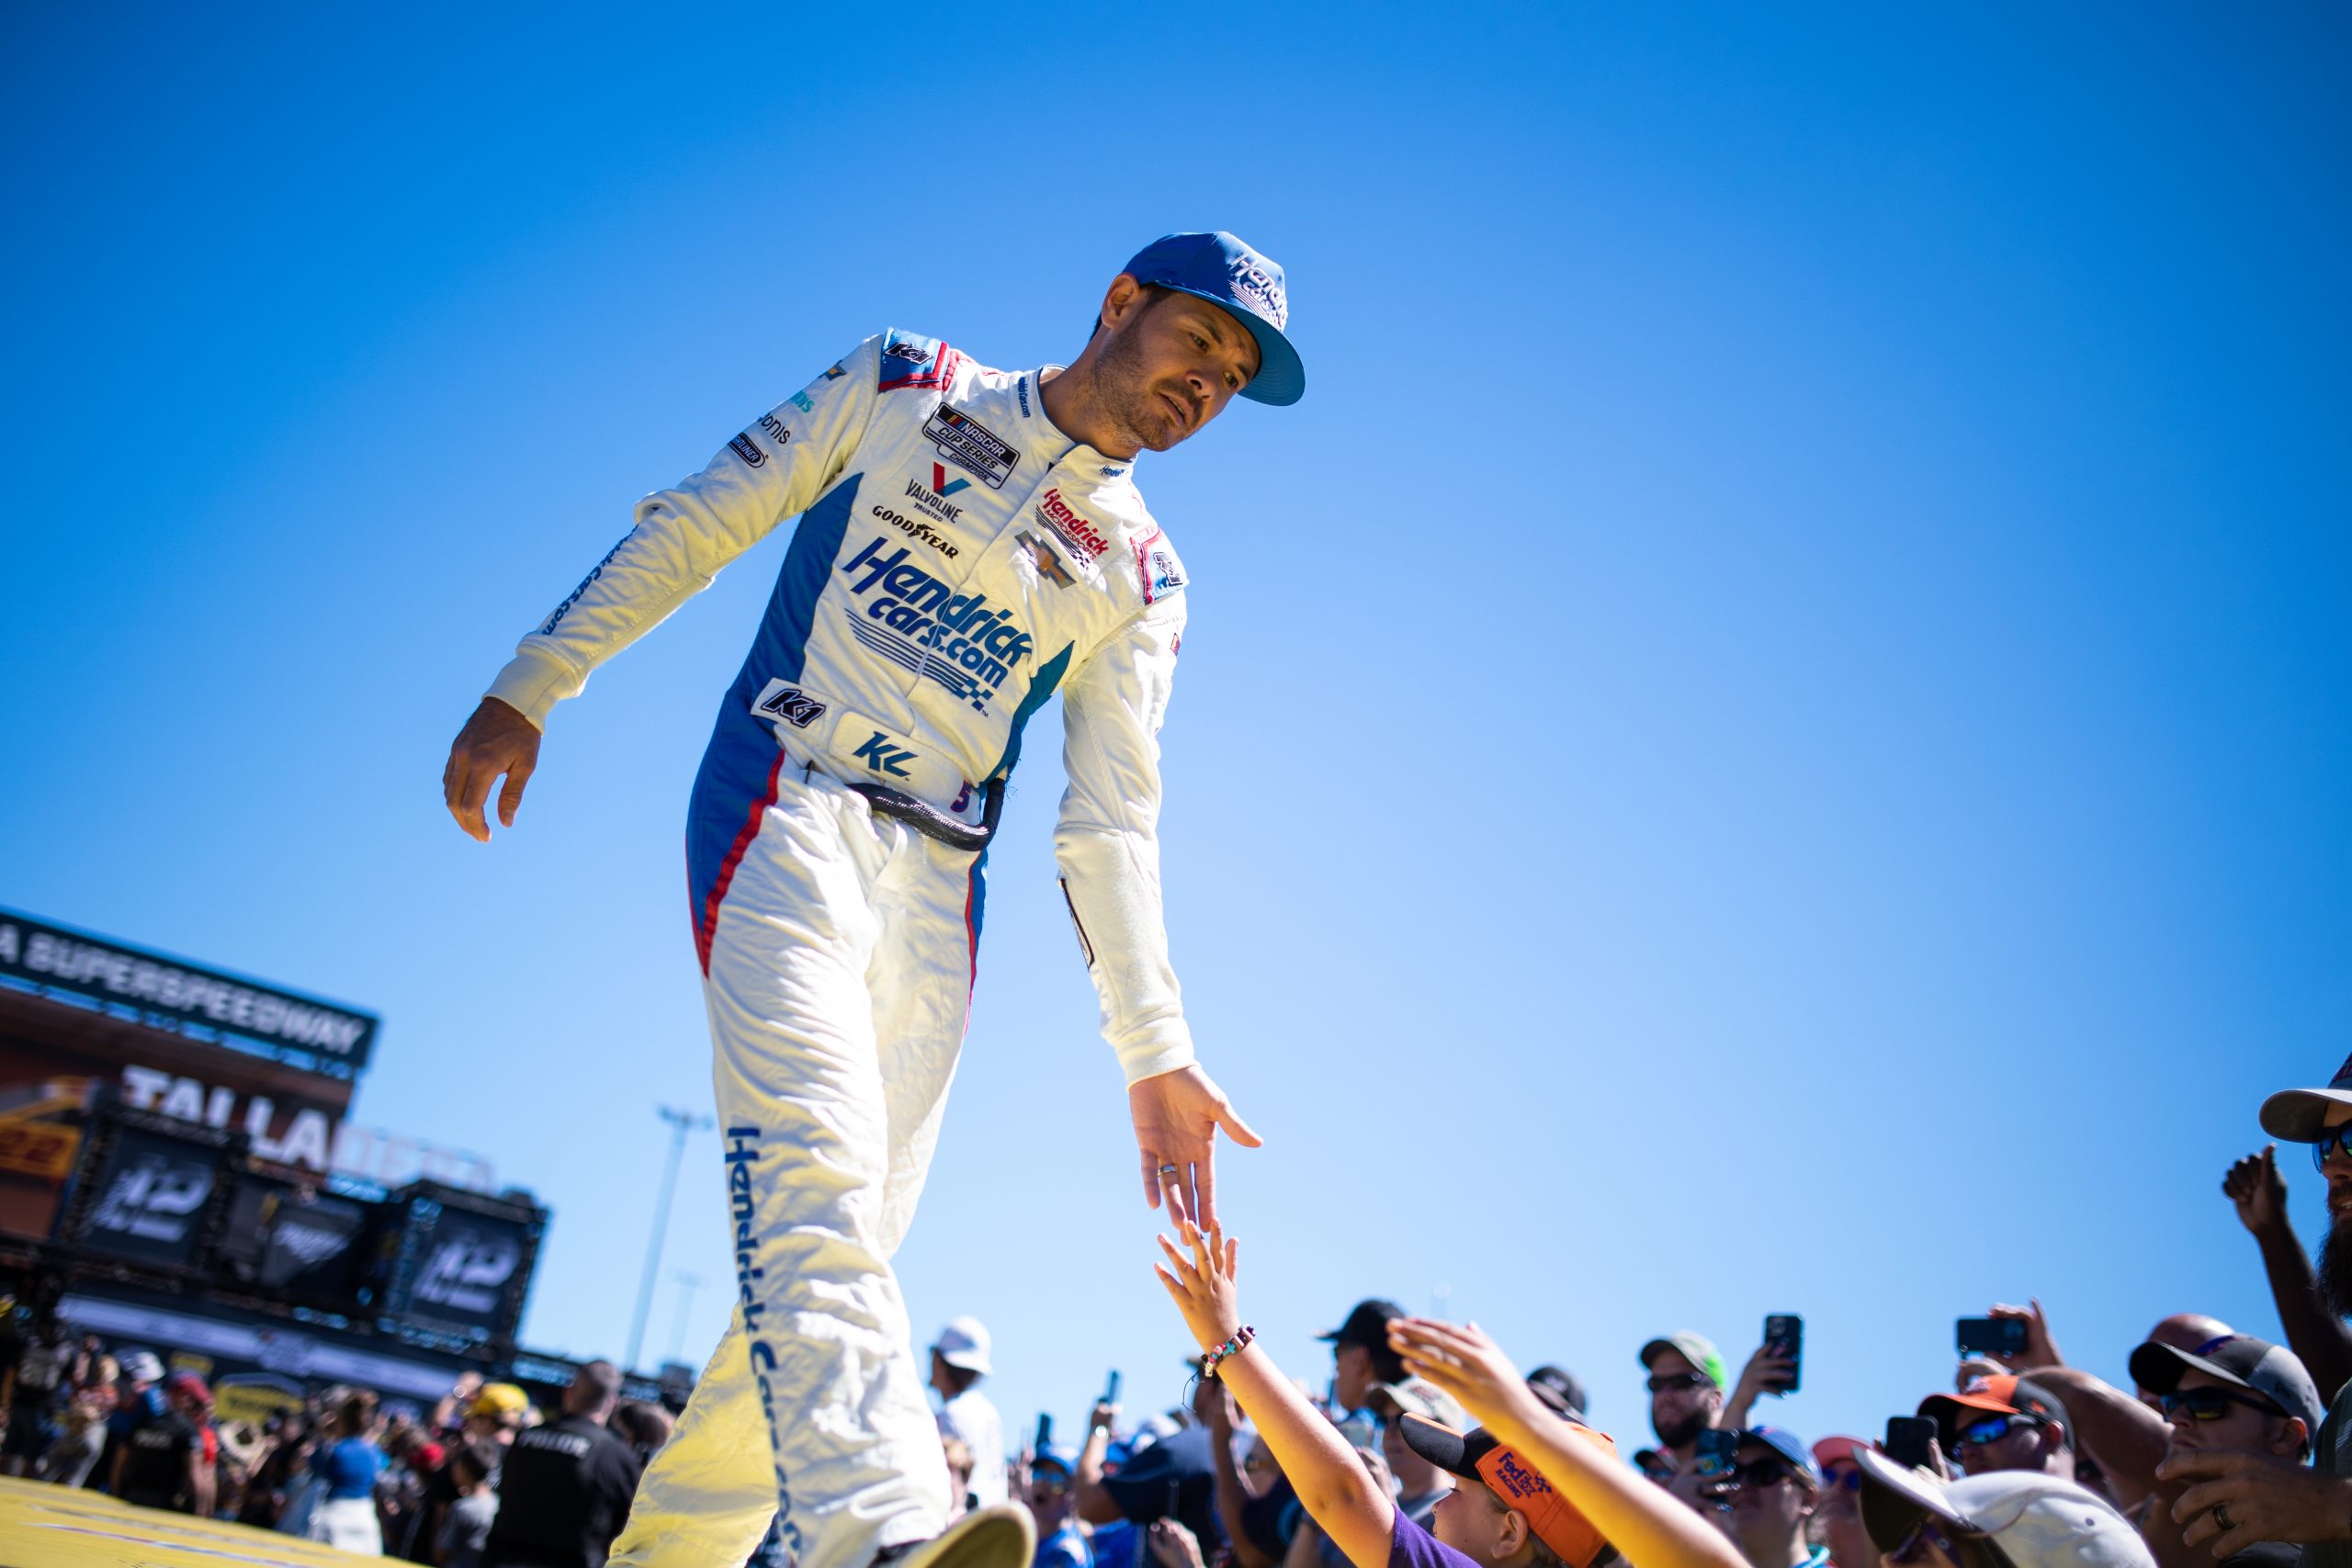 While Kyle Larson was shuffled to 18th for the finish, he was in the mix throughout Sunday's race at Talladega. (Photo: Riley Thompson | The Podium Finish)